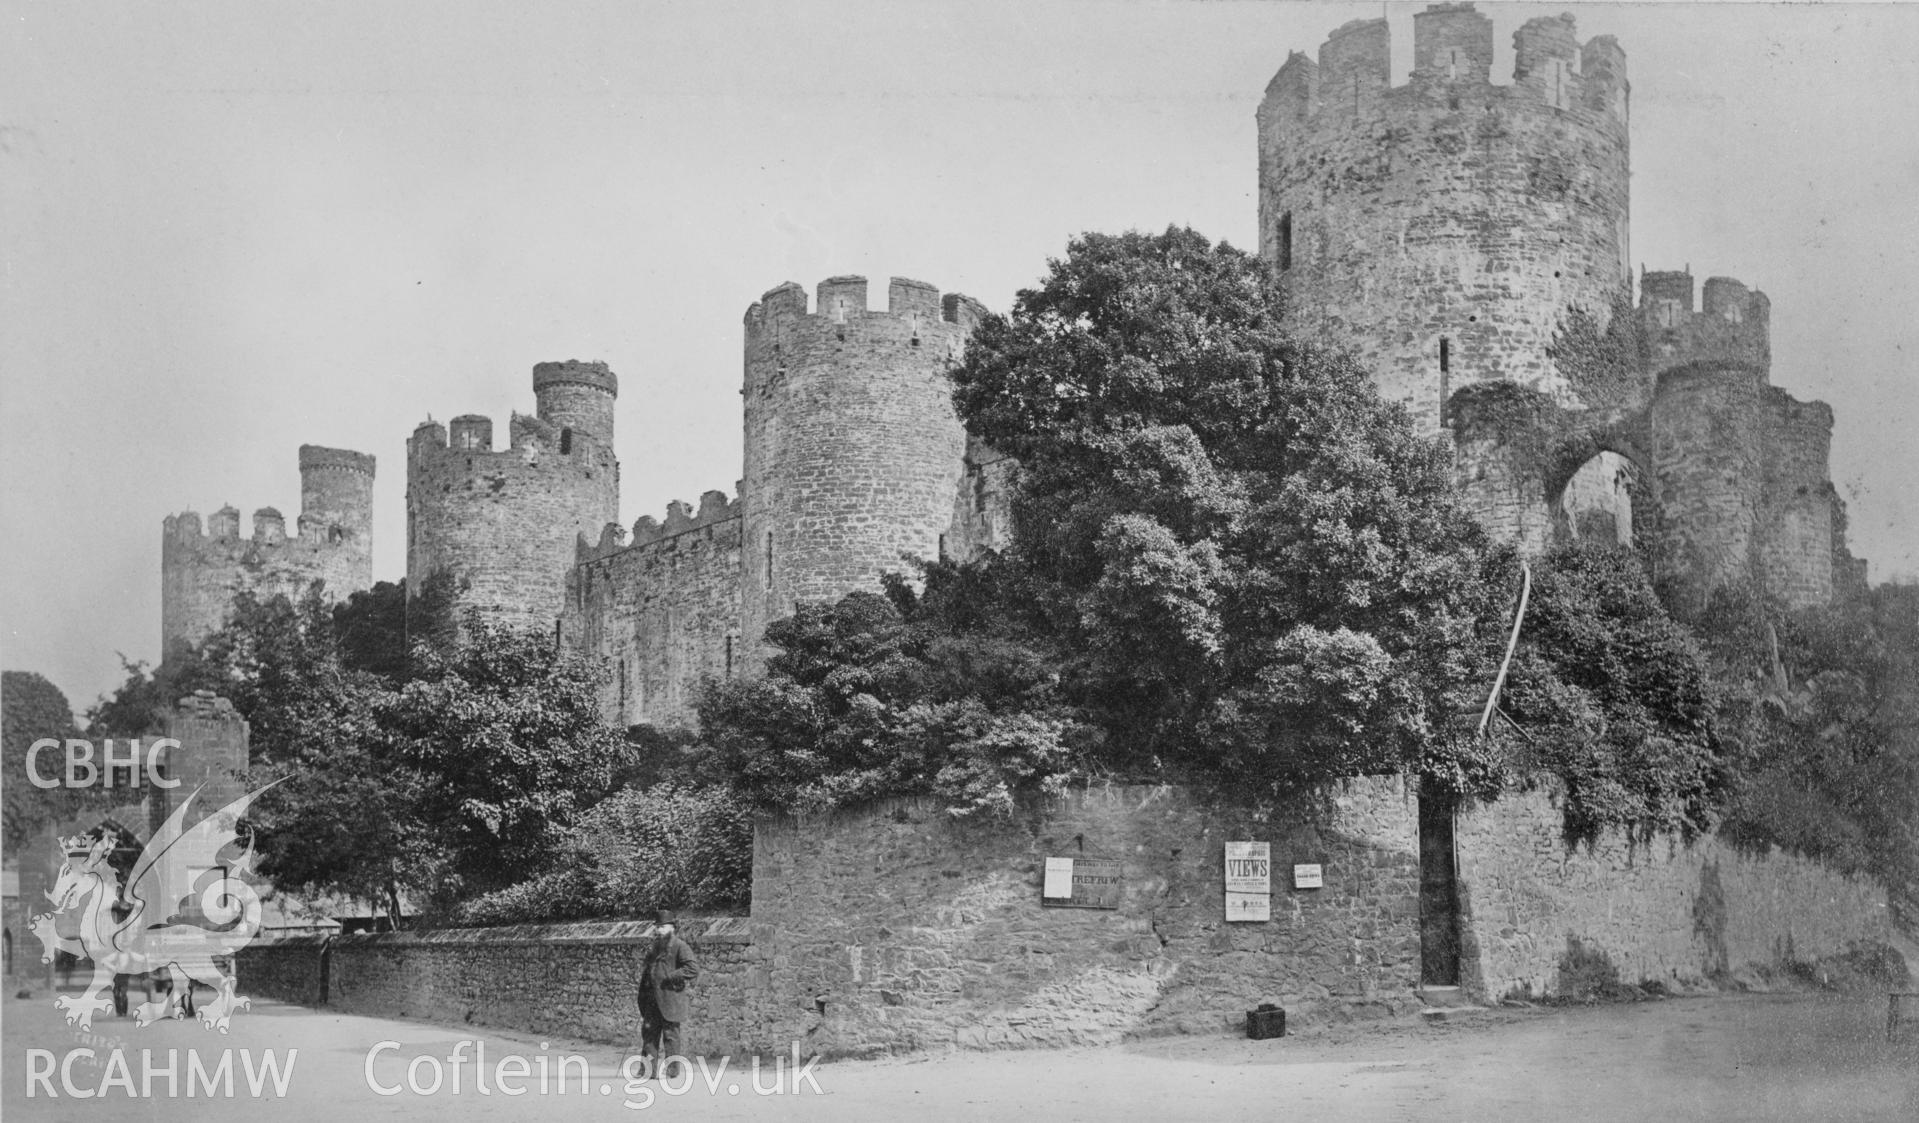 Digital copy of an acetate negative showing Conwy Castle.